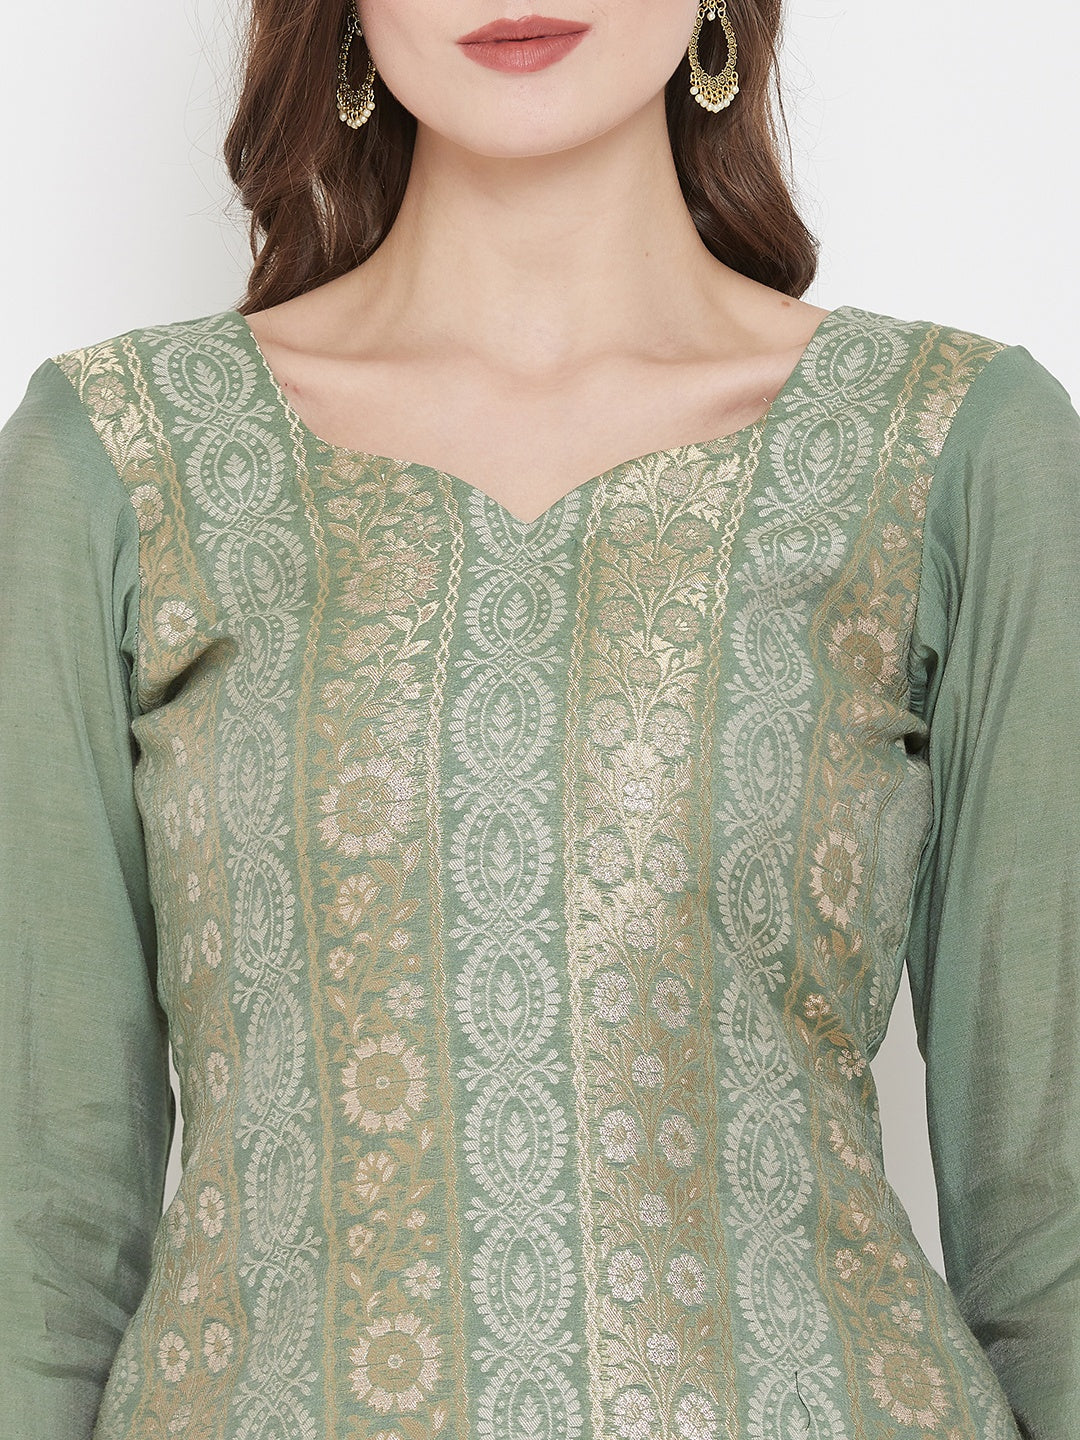 ORGANIC COTTON WOVEN LIGHT OLIVE DRESS MATERIAL WITH DUPATTA